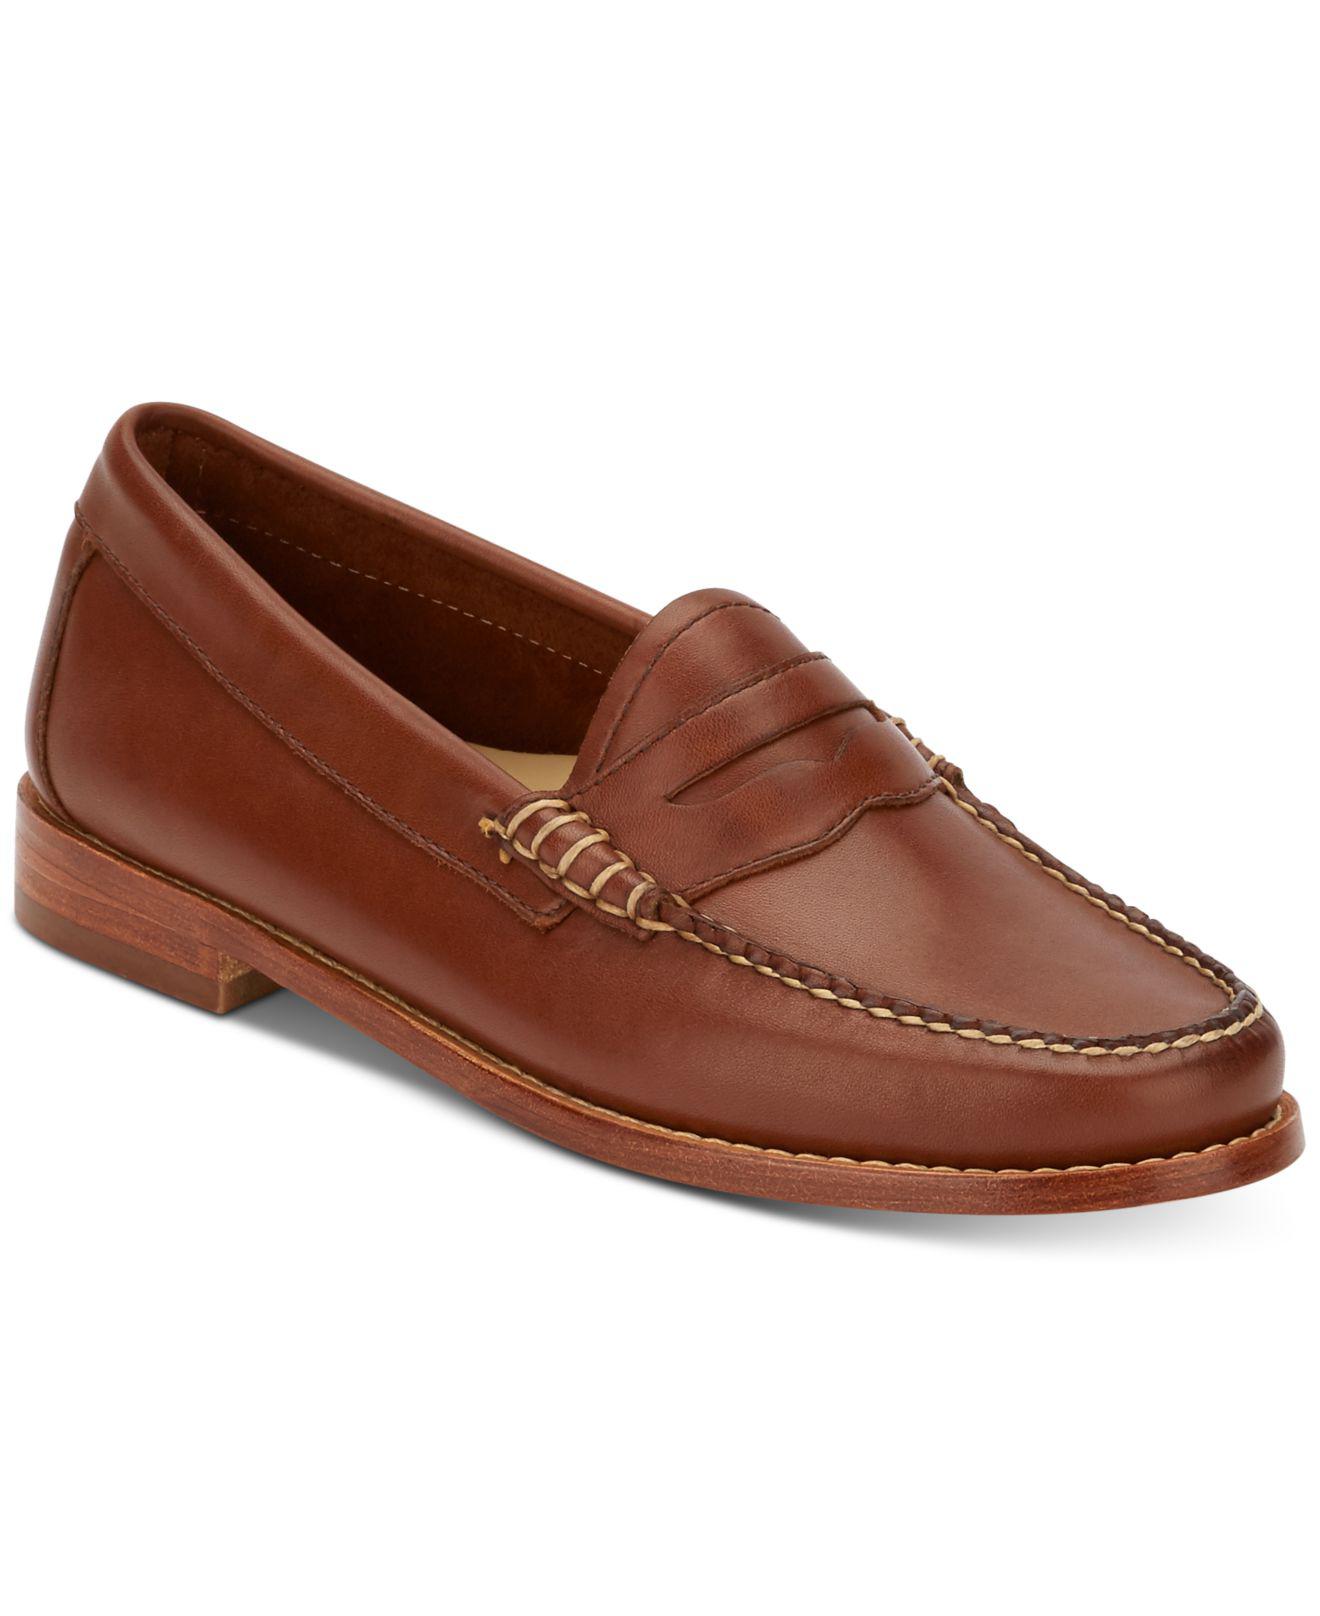 G.H.BASS Leather Women's Weejuns Whitney Penny Loafers in Cognac (Brown ...